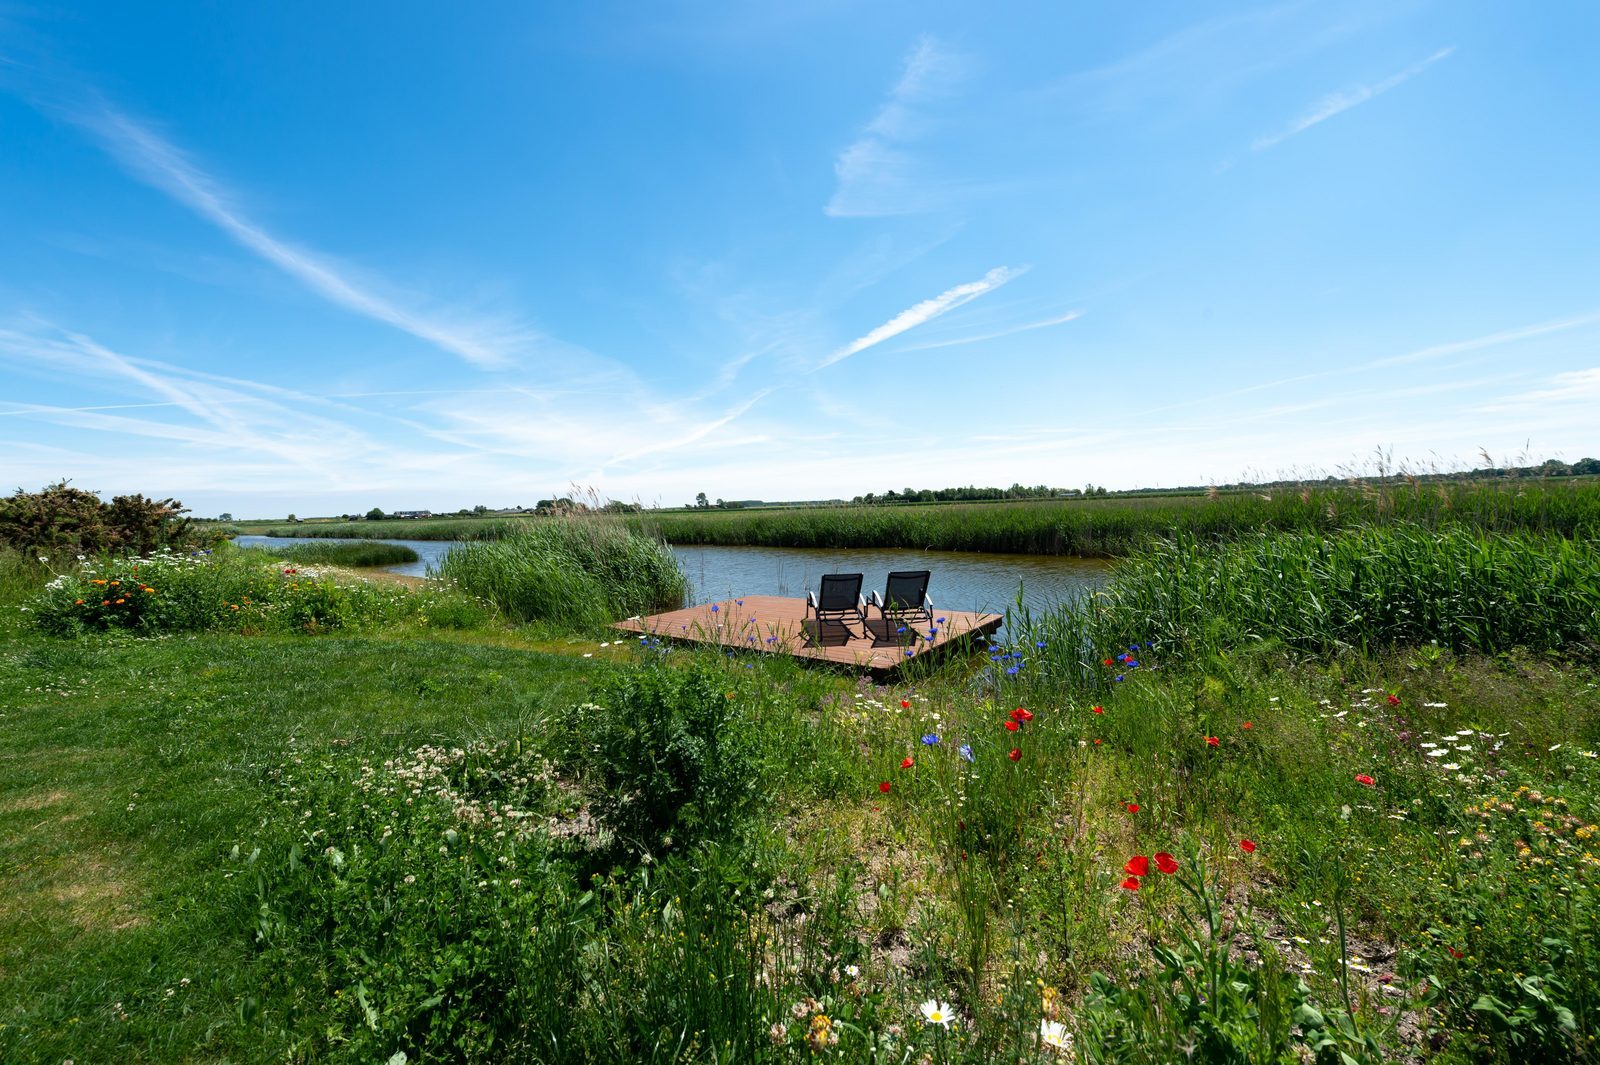 Luxury stay in Zeeland with panoramic views of the polder landscape